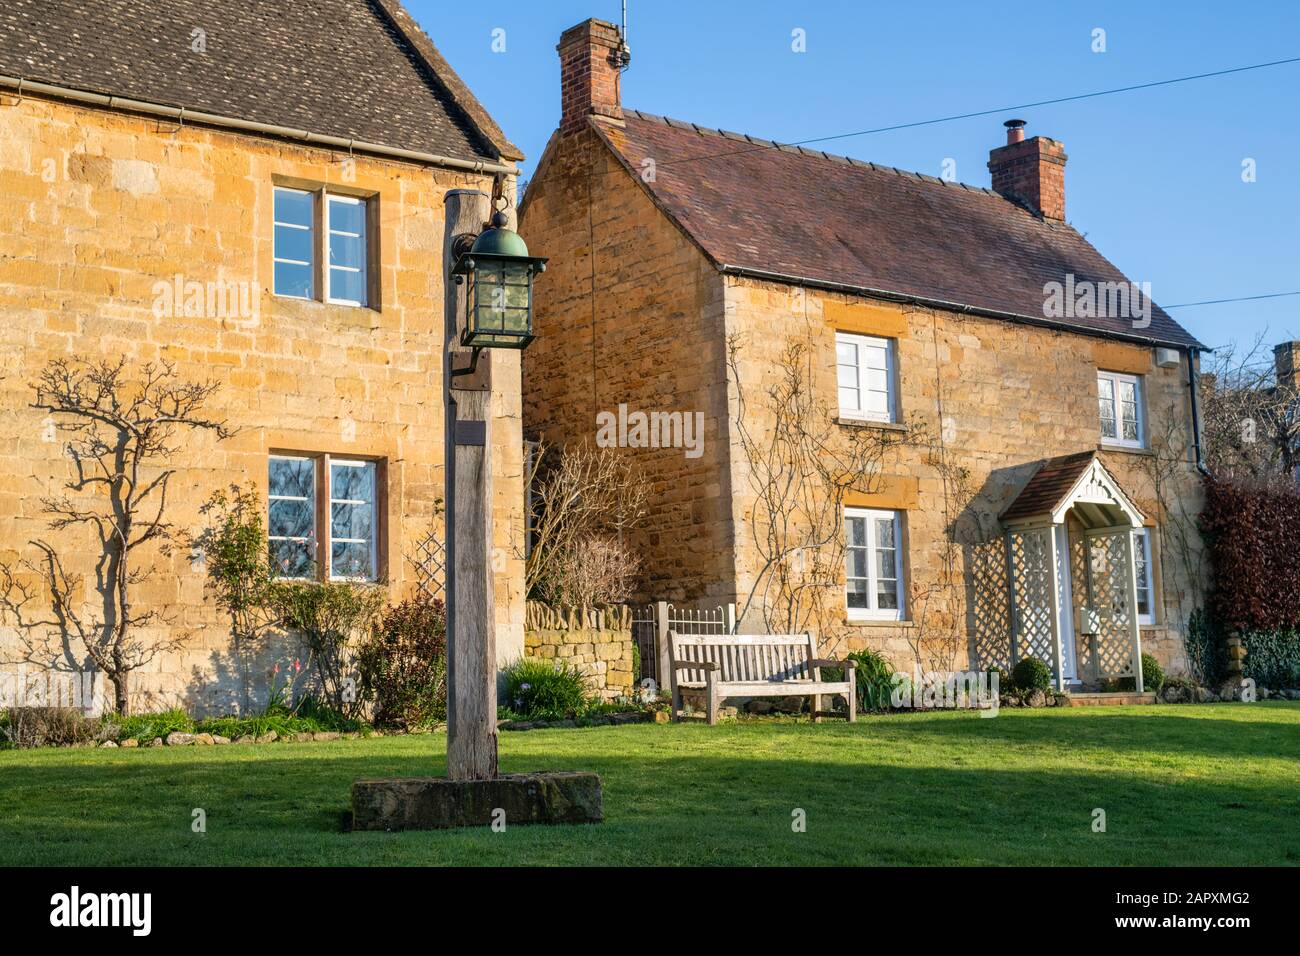 Stott Lantern fuori Cotswold cottages in inverno luce del sole al tramonto. Stanton, Cotswolds, Gloucestershire, Inghilterra Foto Stock